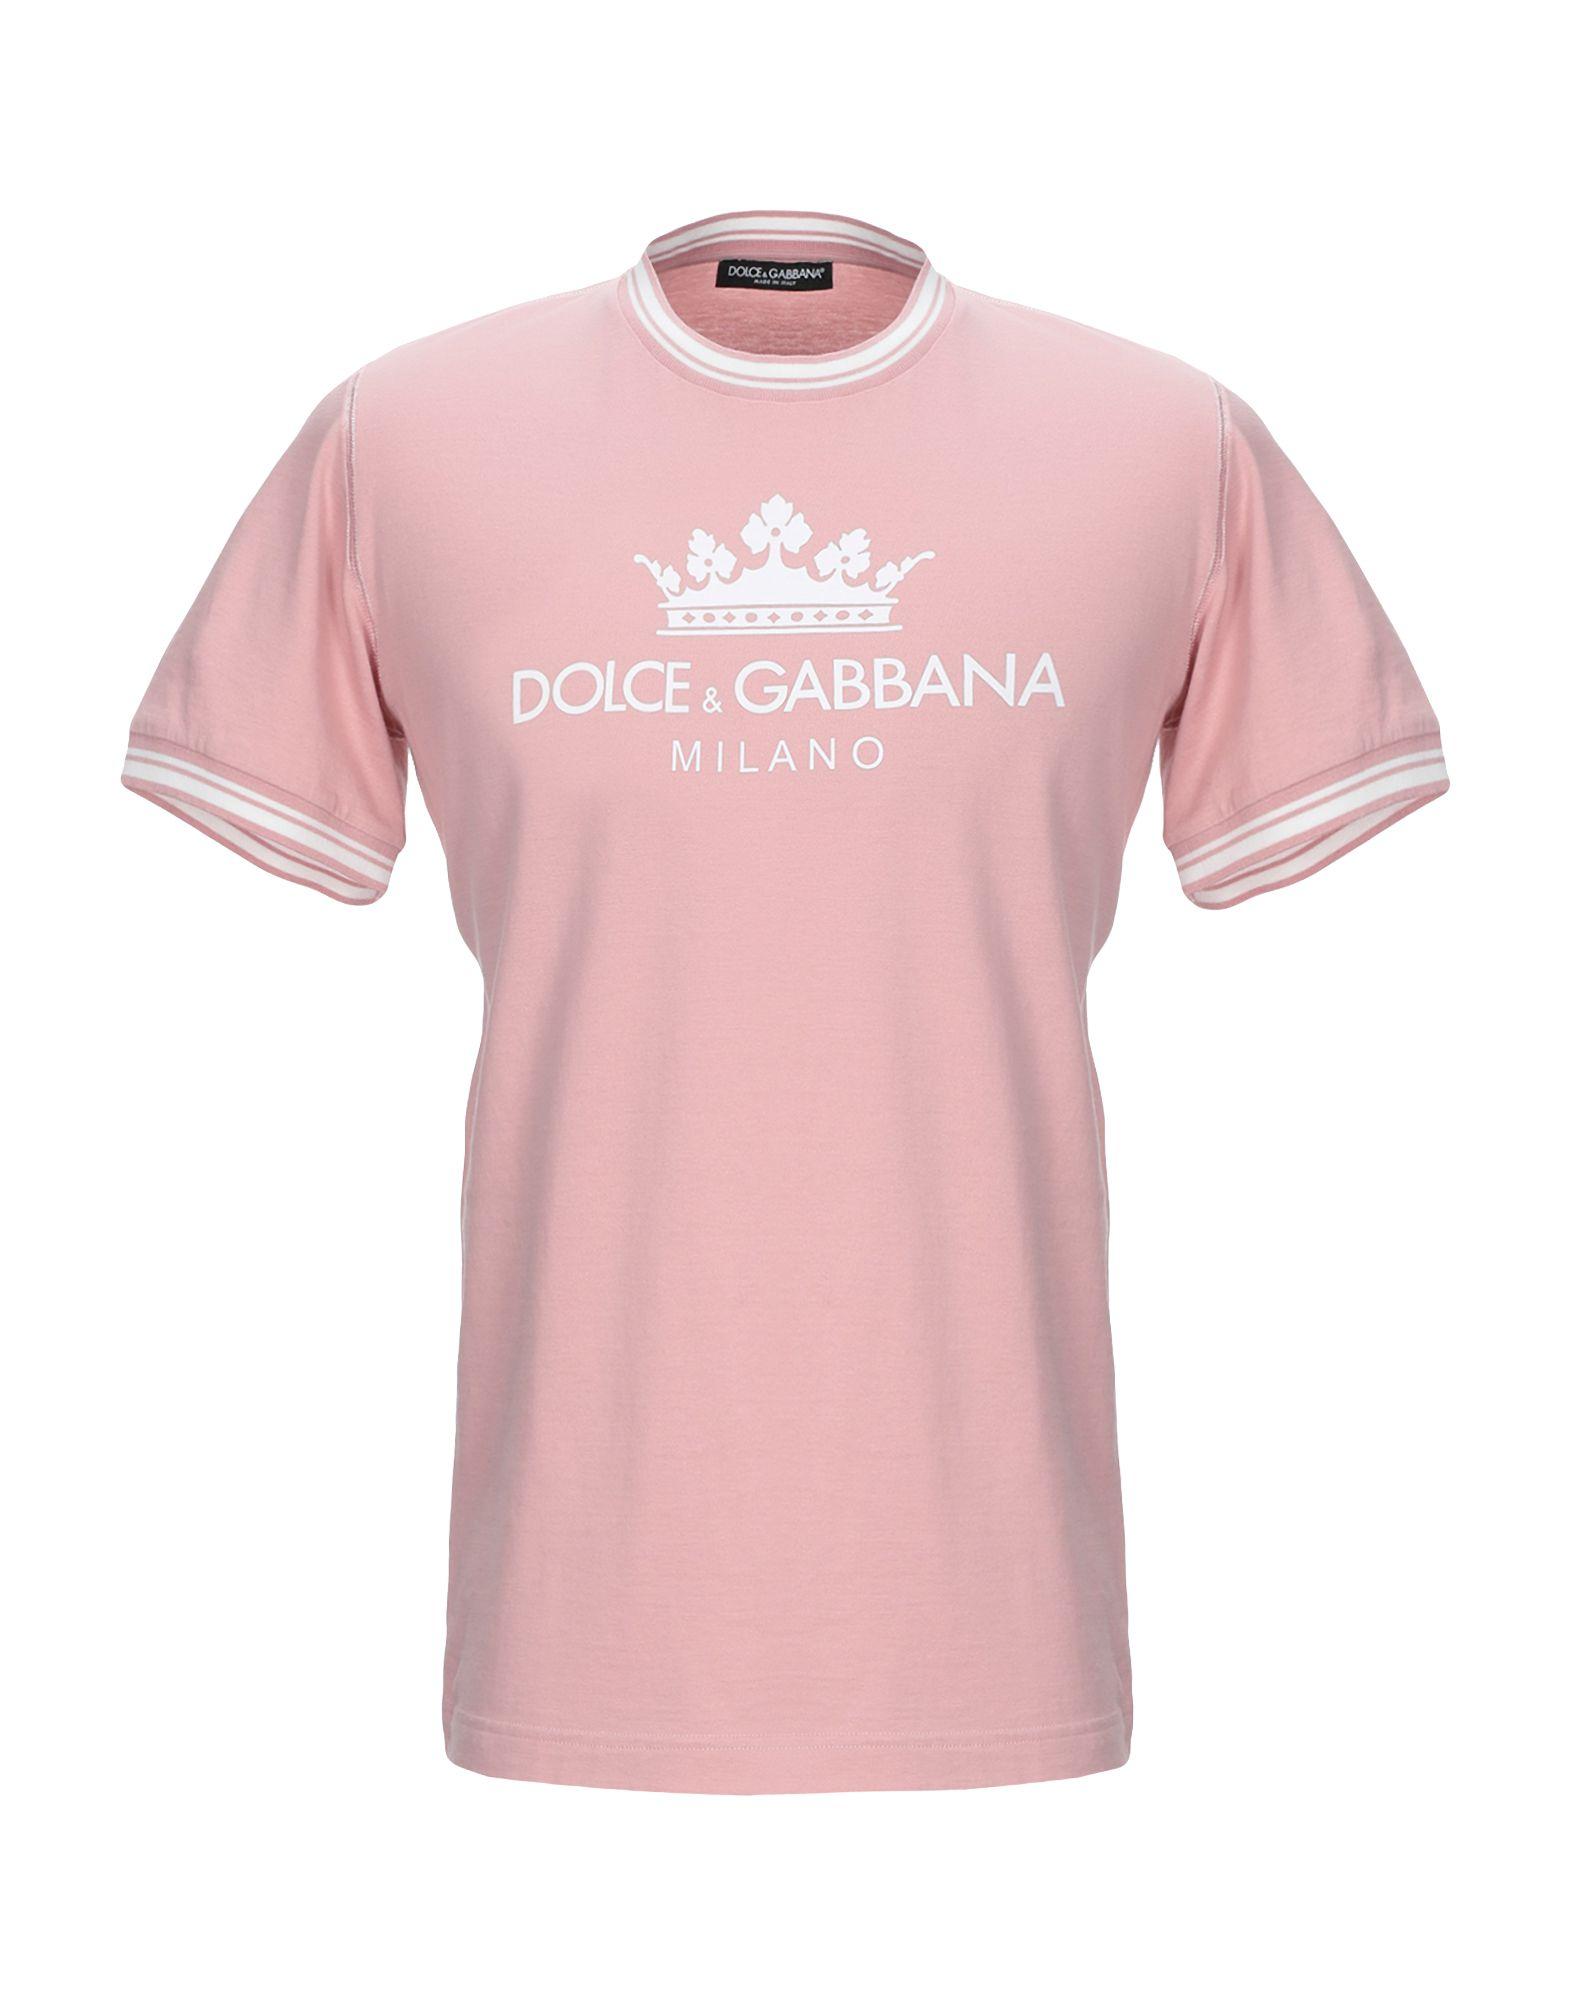 Dolce & Gabbana Cotton T-shirt in Pink for Men - Lyst